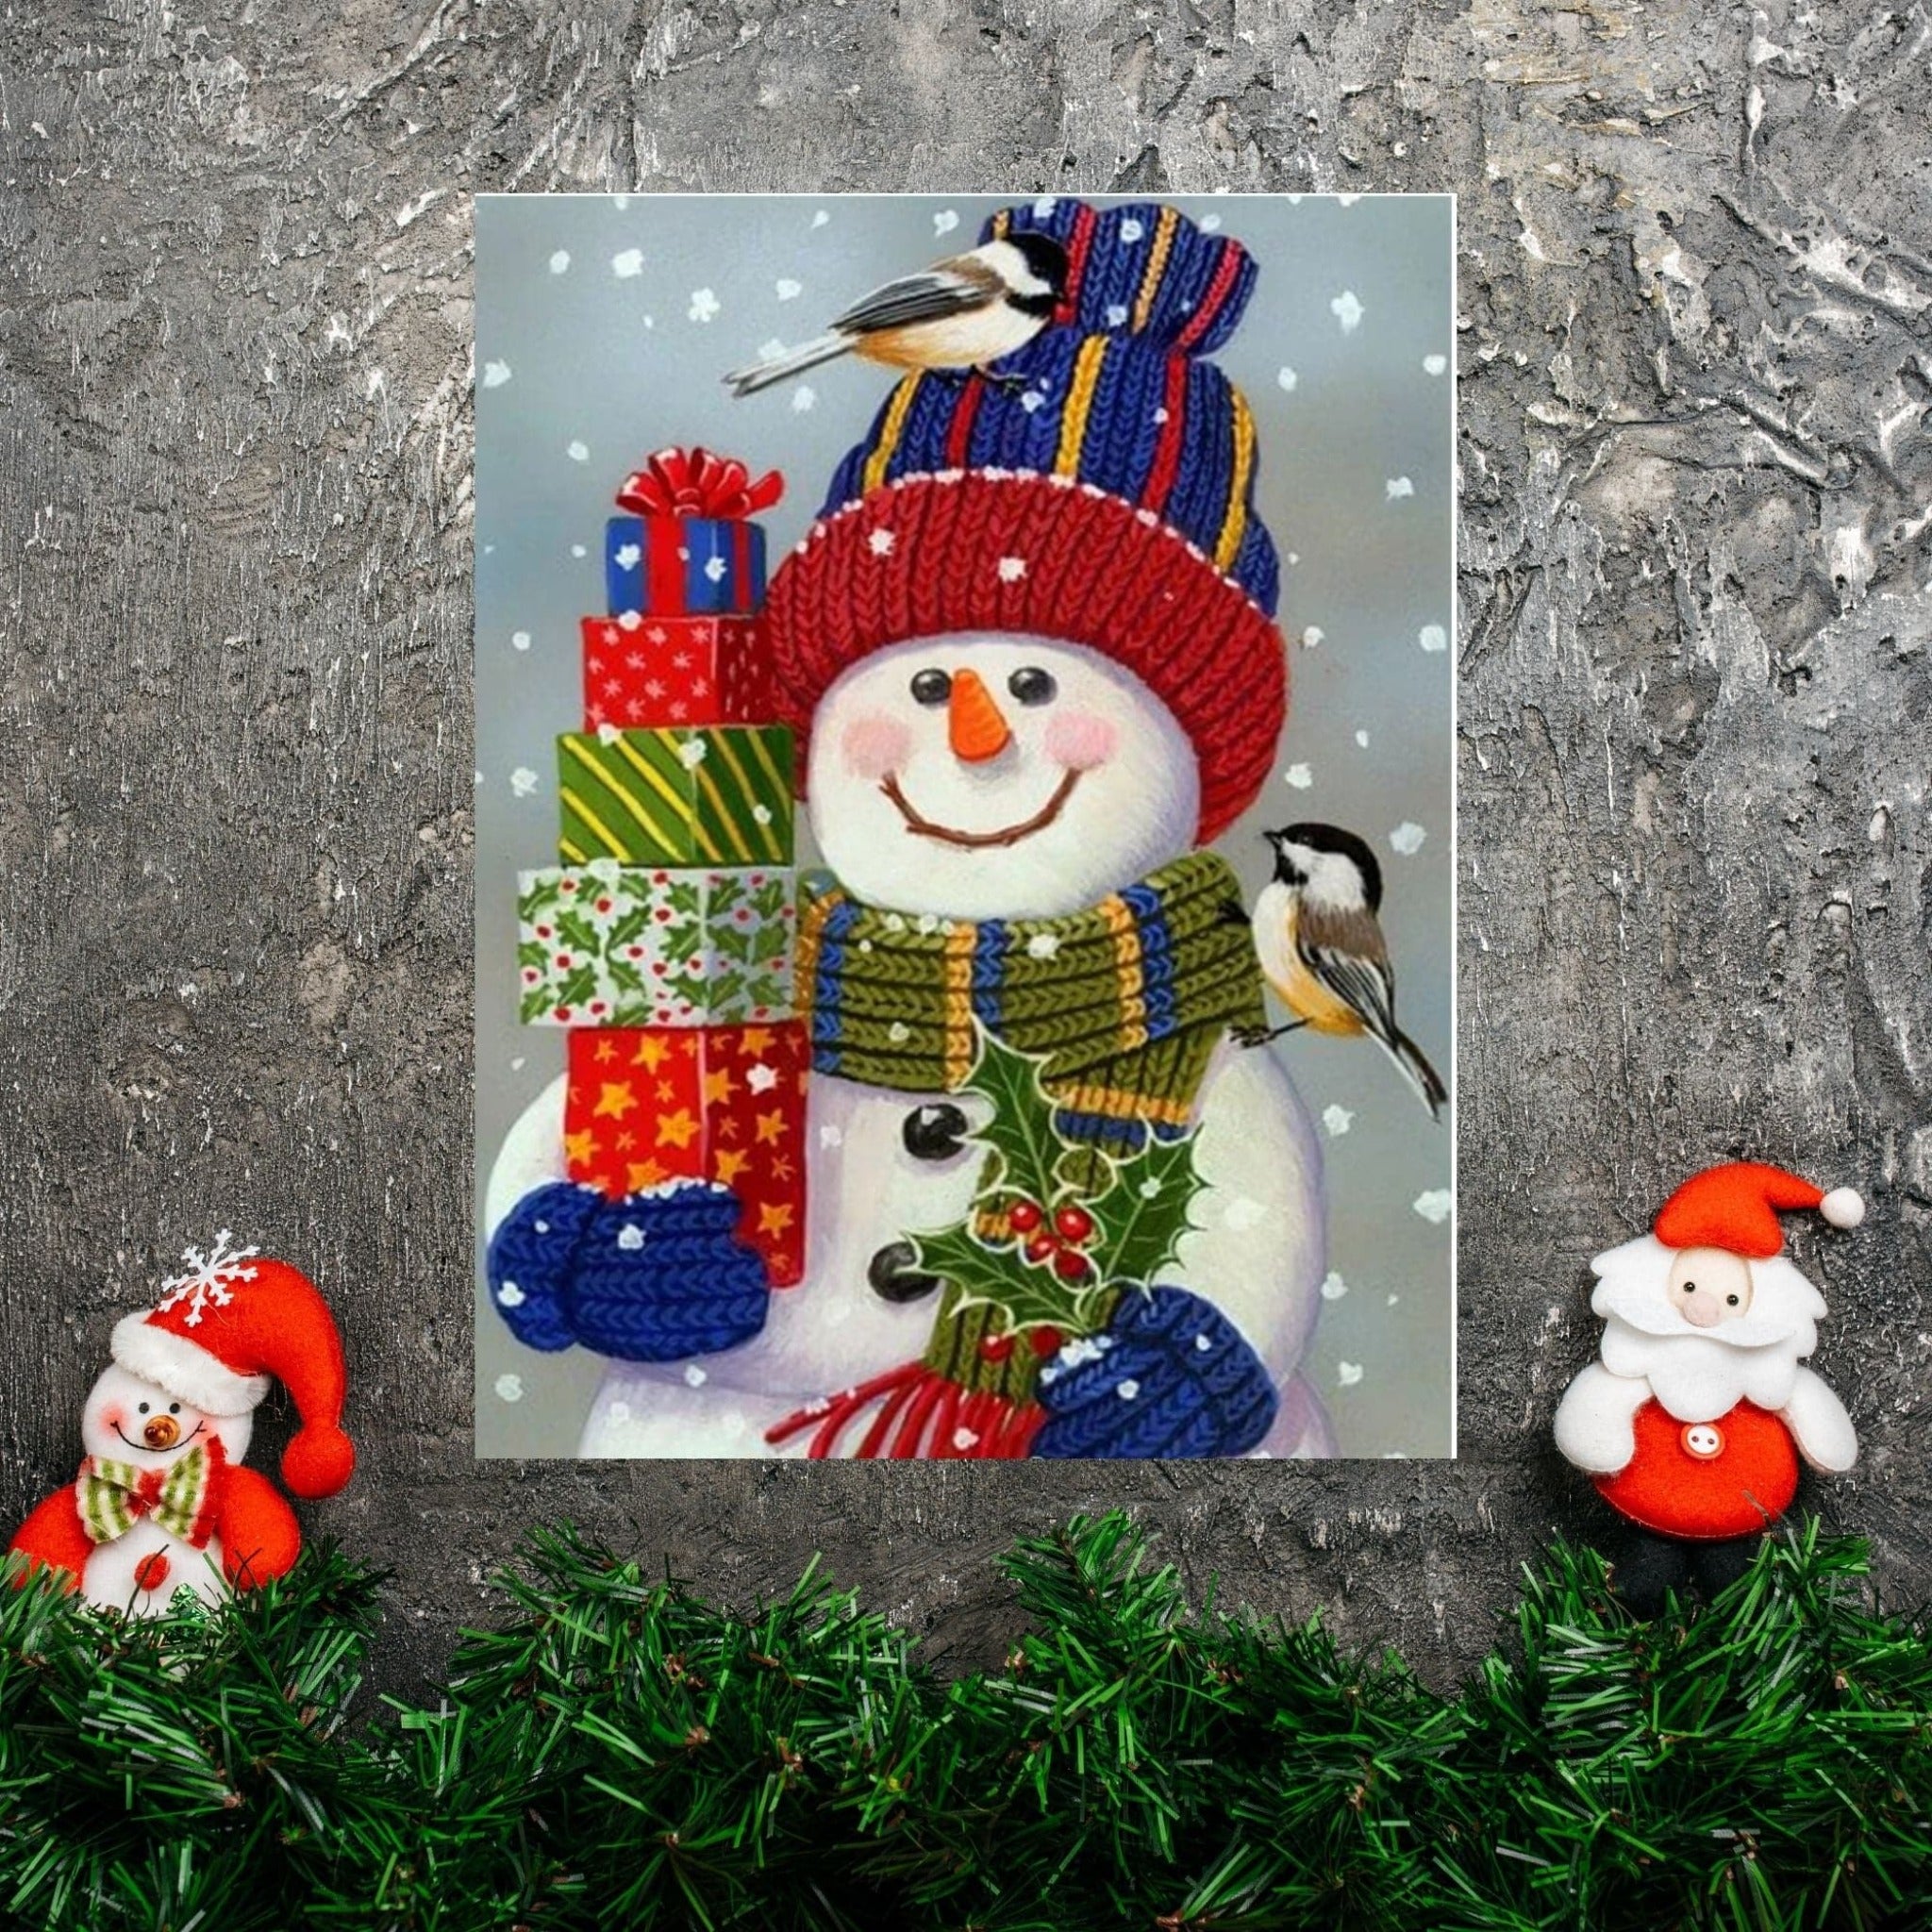 Snowman with Gifts Present Diamond Painting Art Kit 5D Full Drill Round 35*35 cm - Durazza